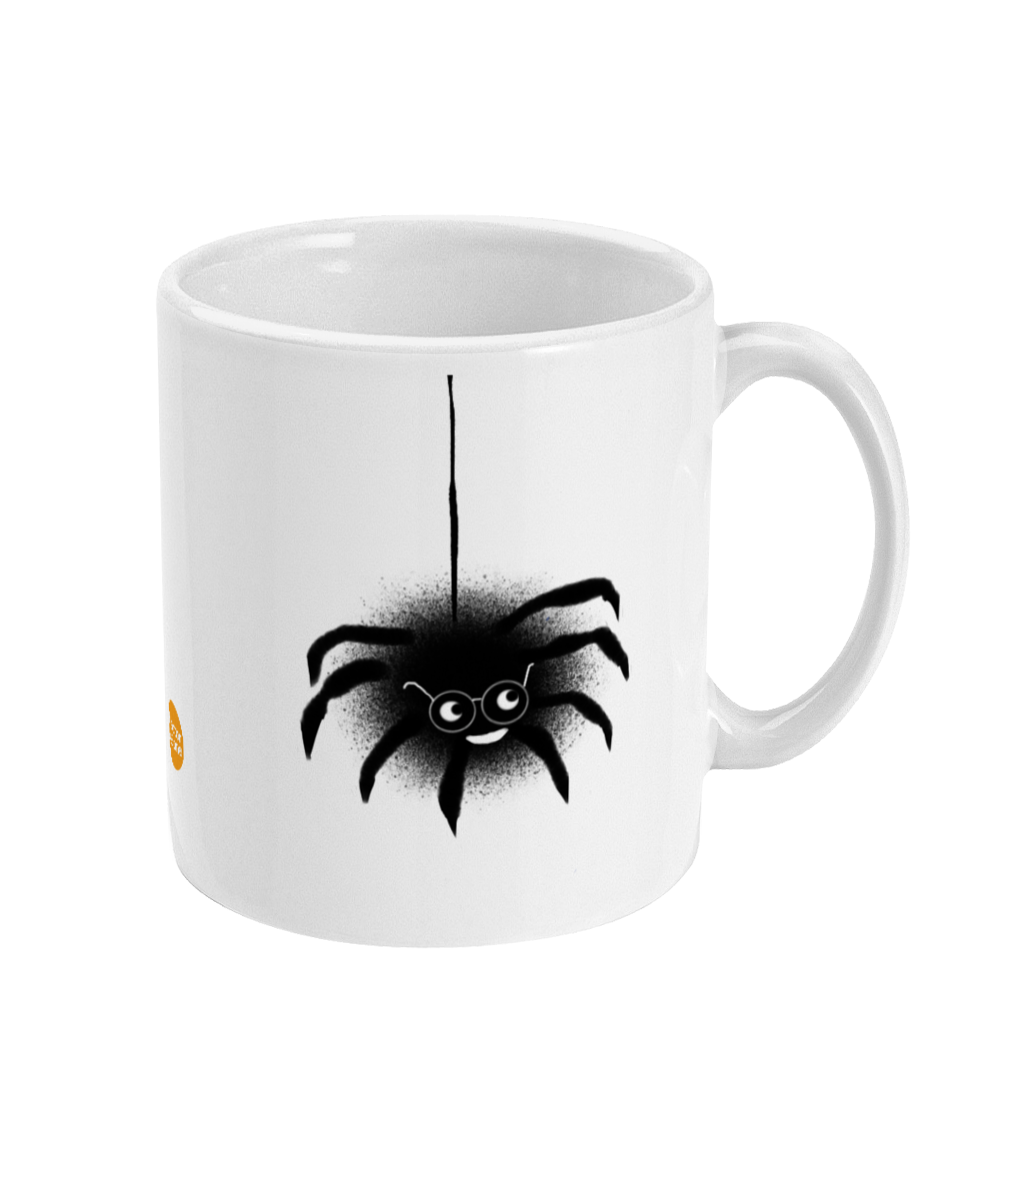 Hanging Spectacled Spider design coffee mug by Hector and Bone Right View